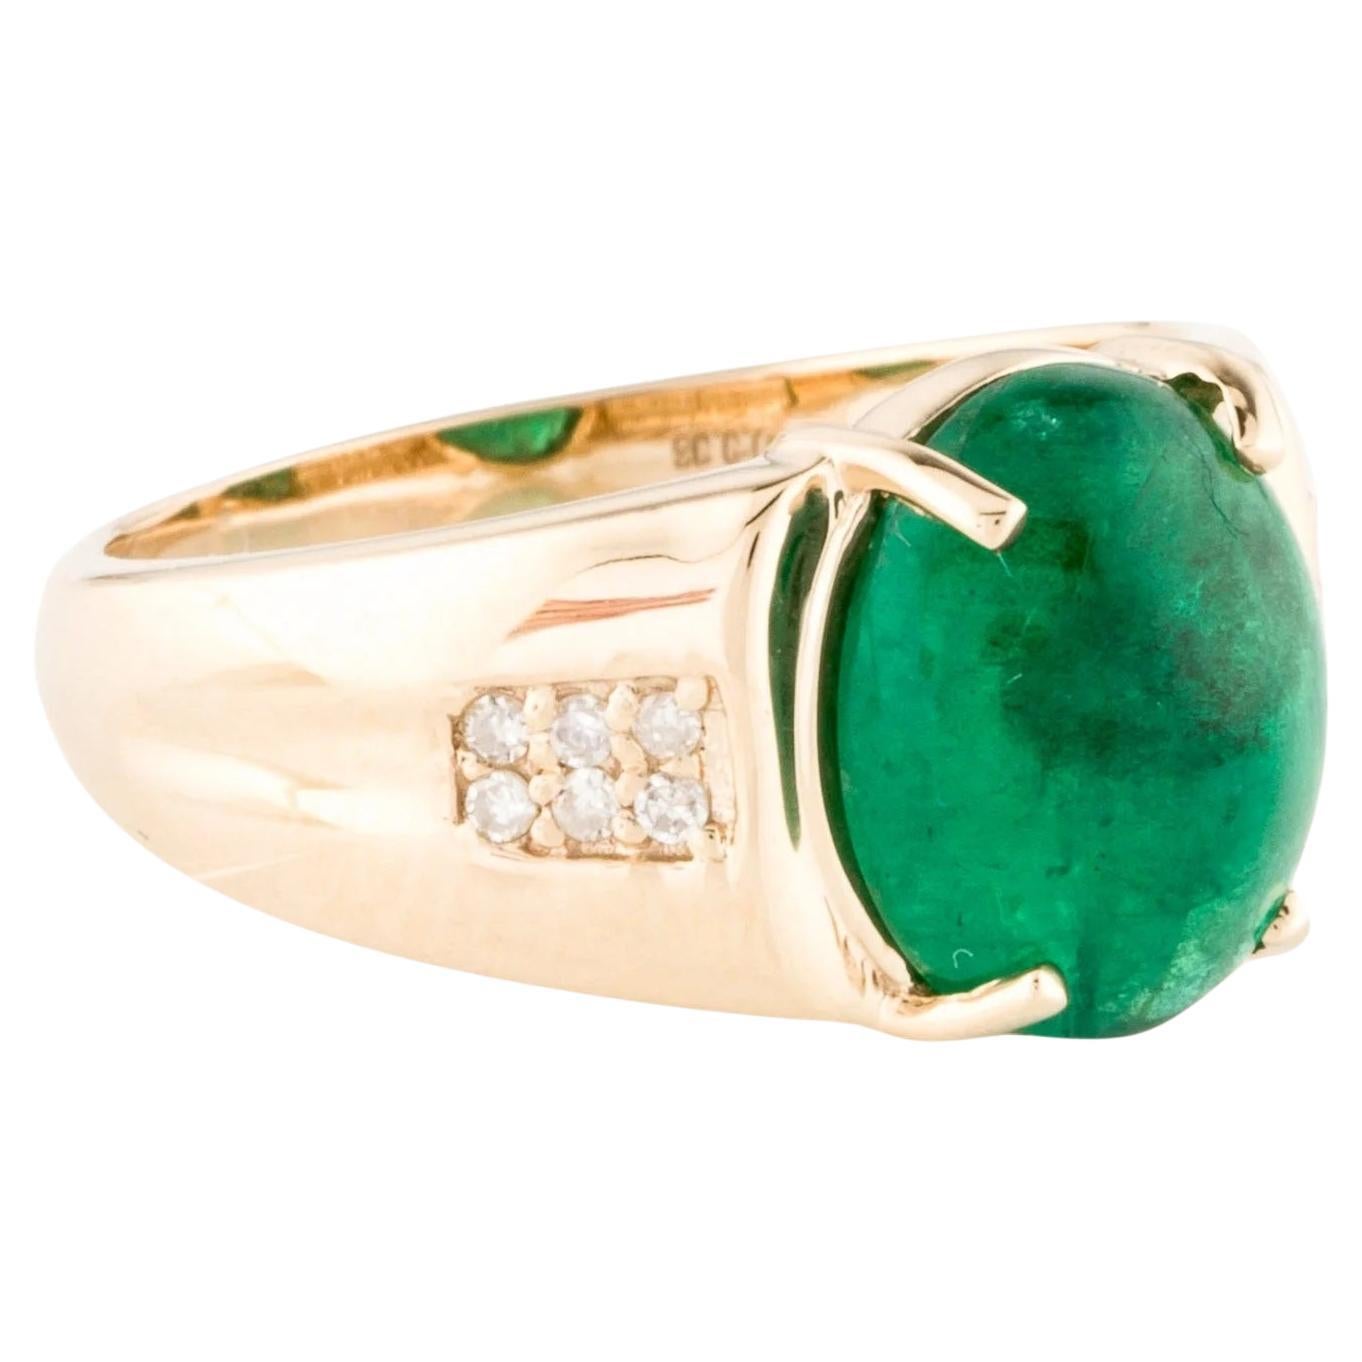 14K 3.90ct Emerald & Diamond Cocktail Ring  Oval Cabochon Emerald  Yellow Gold